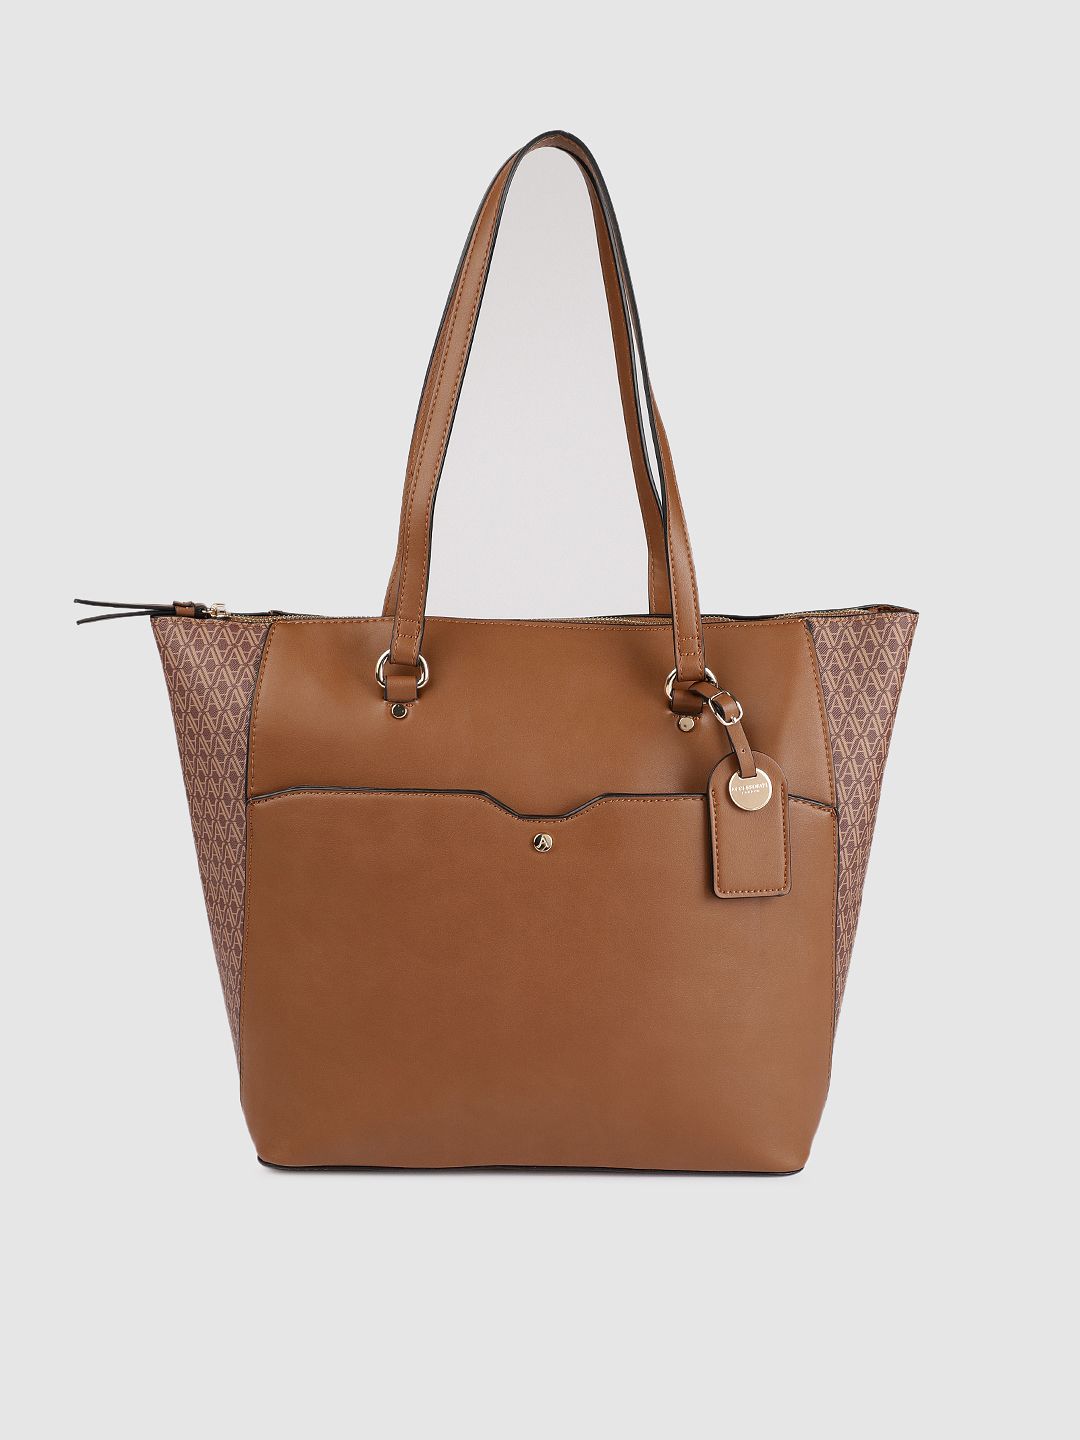 Accessorize Brown Solid Shoulder Bag Price in India